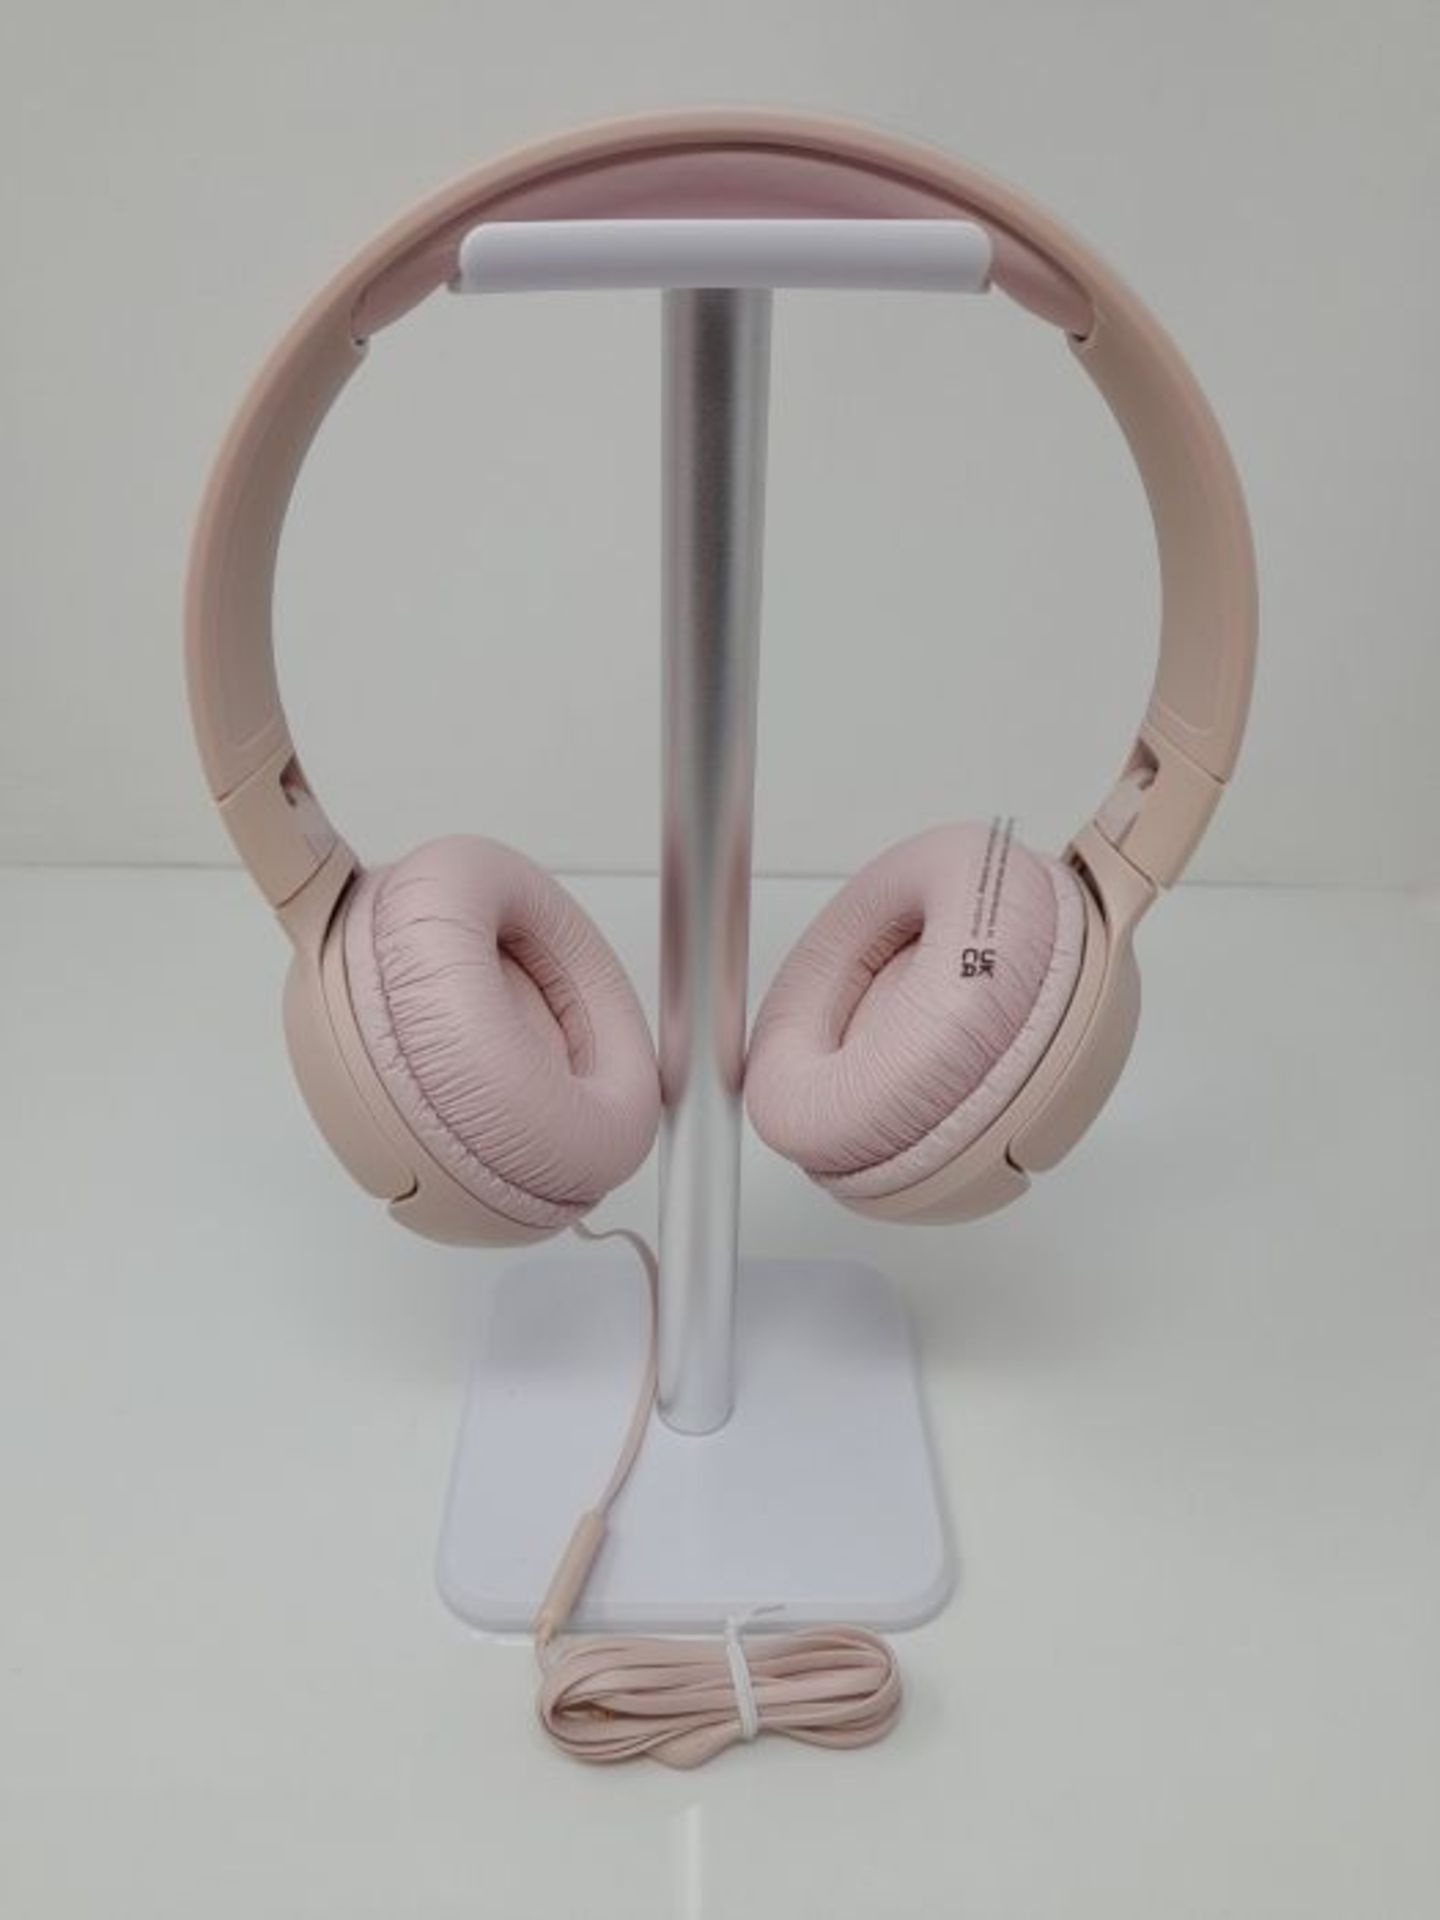 JBL T500 in Pink - Over Ear Lightweight / Foldable Headphones with Pure Bass Sound - 1 - Image 3 of 3